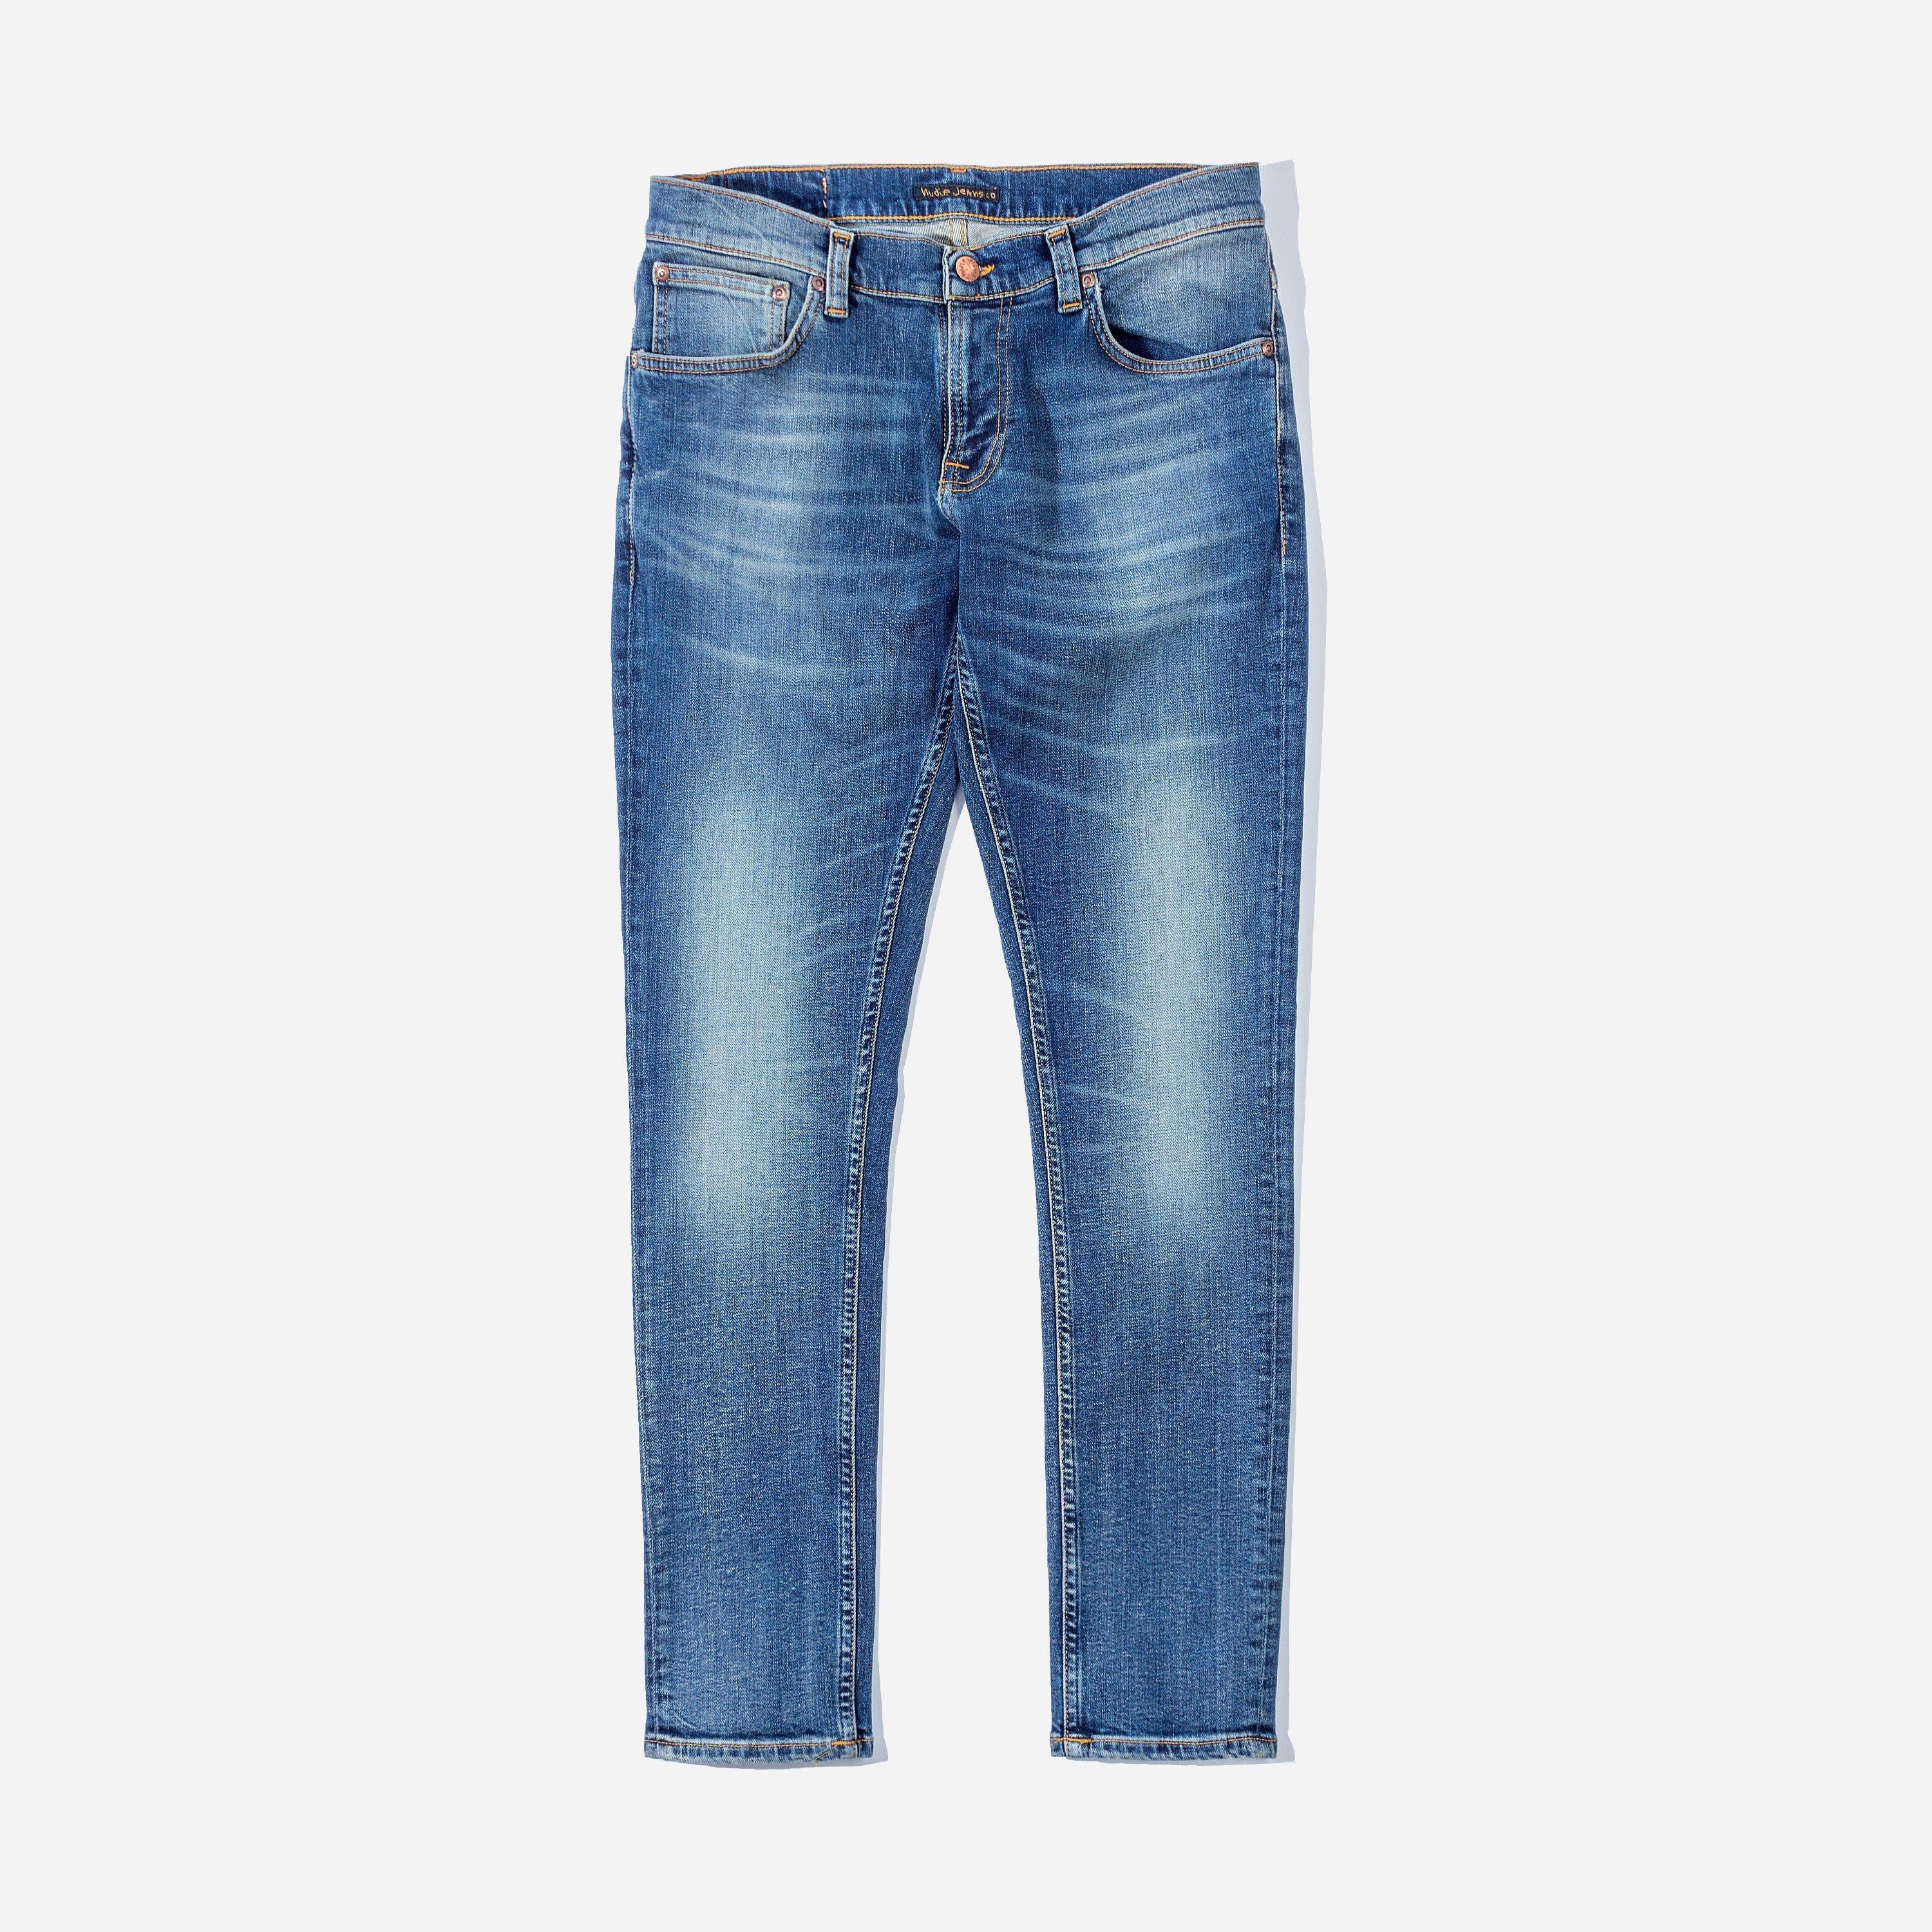 Nudie Jeans Tight Terry Jeans in Blue for Men - Lyst